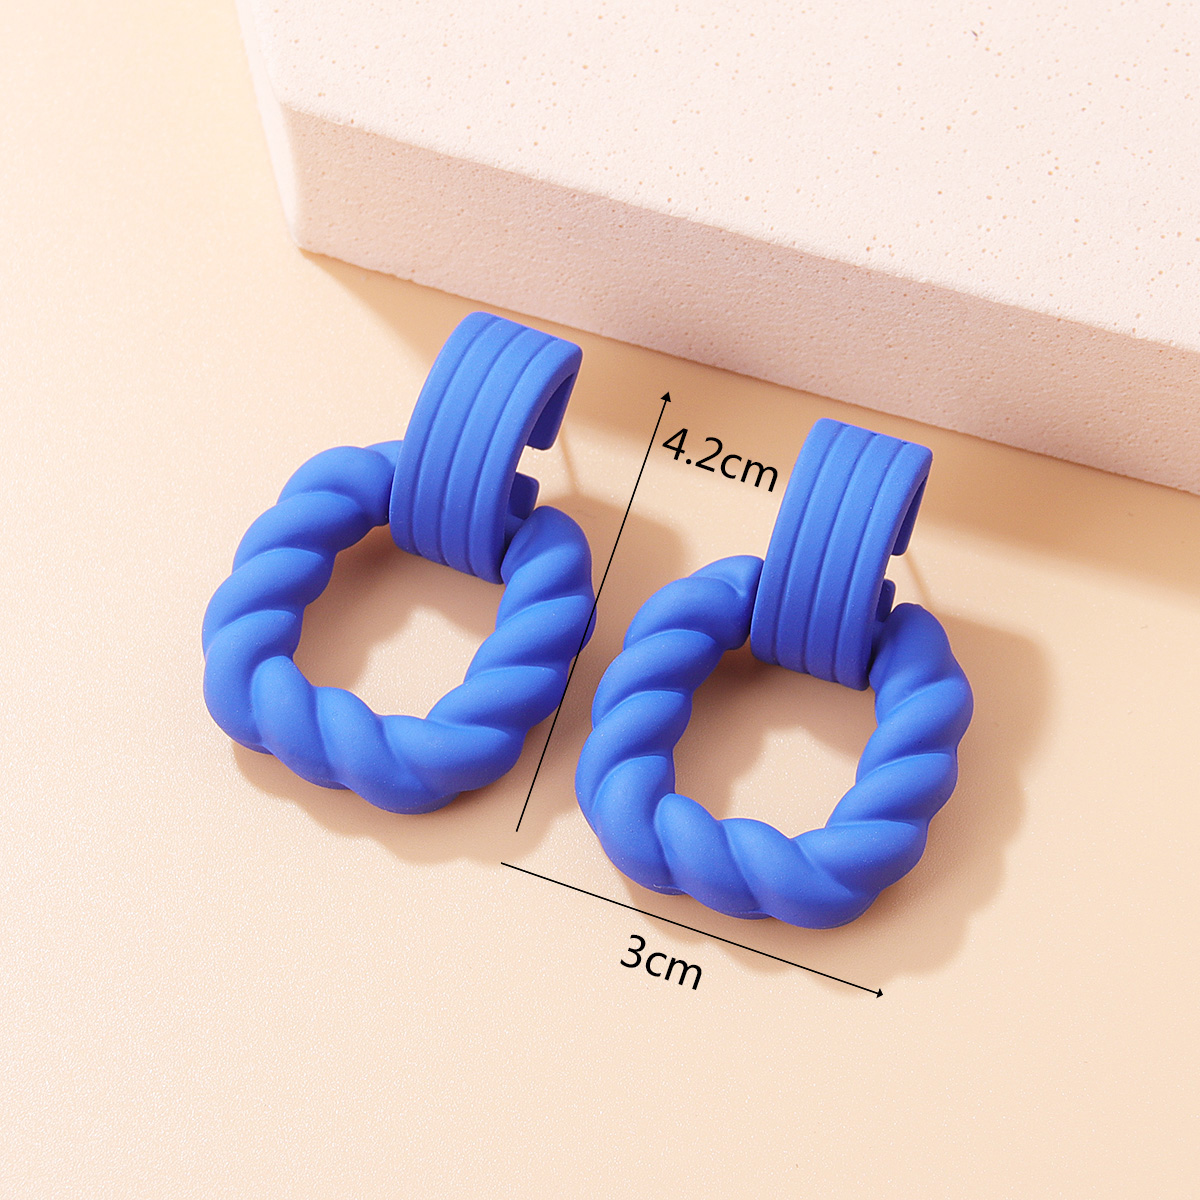 2022 New Fashion Geometric Candy Color Acrylic Rubber Effect Paint Square Twist Earringspicture3